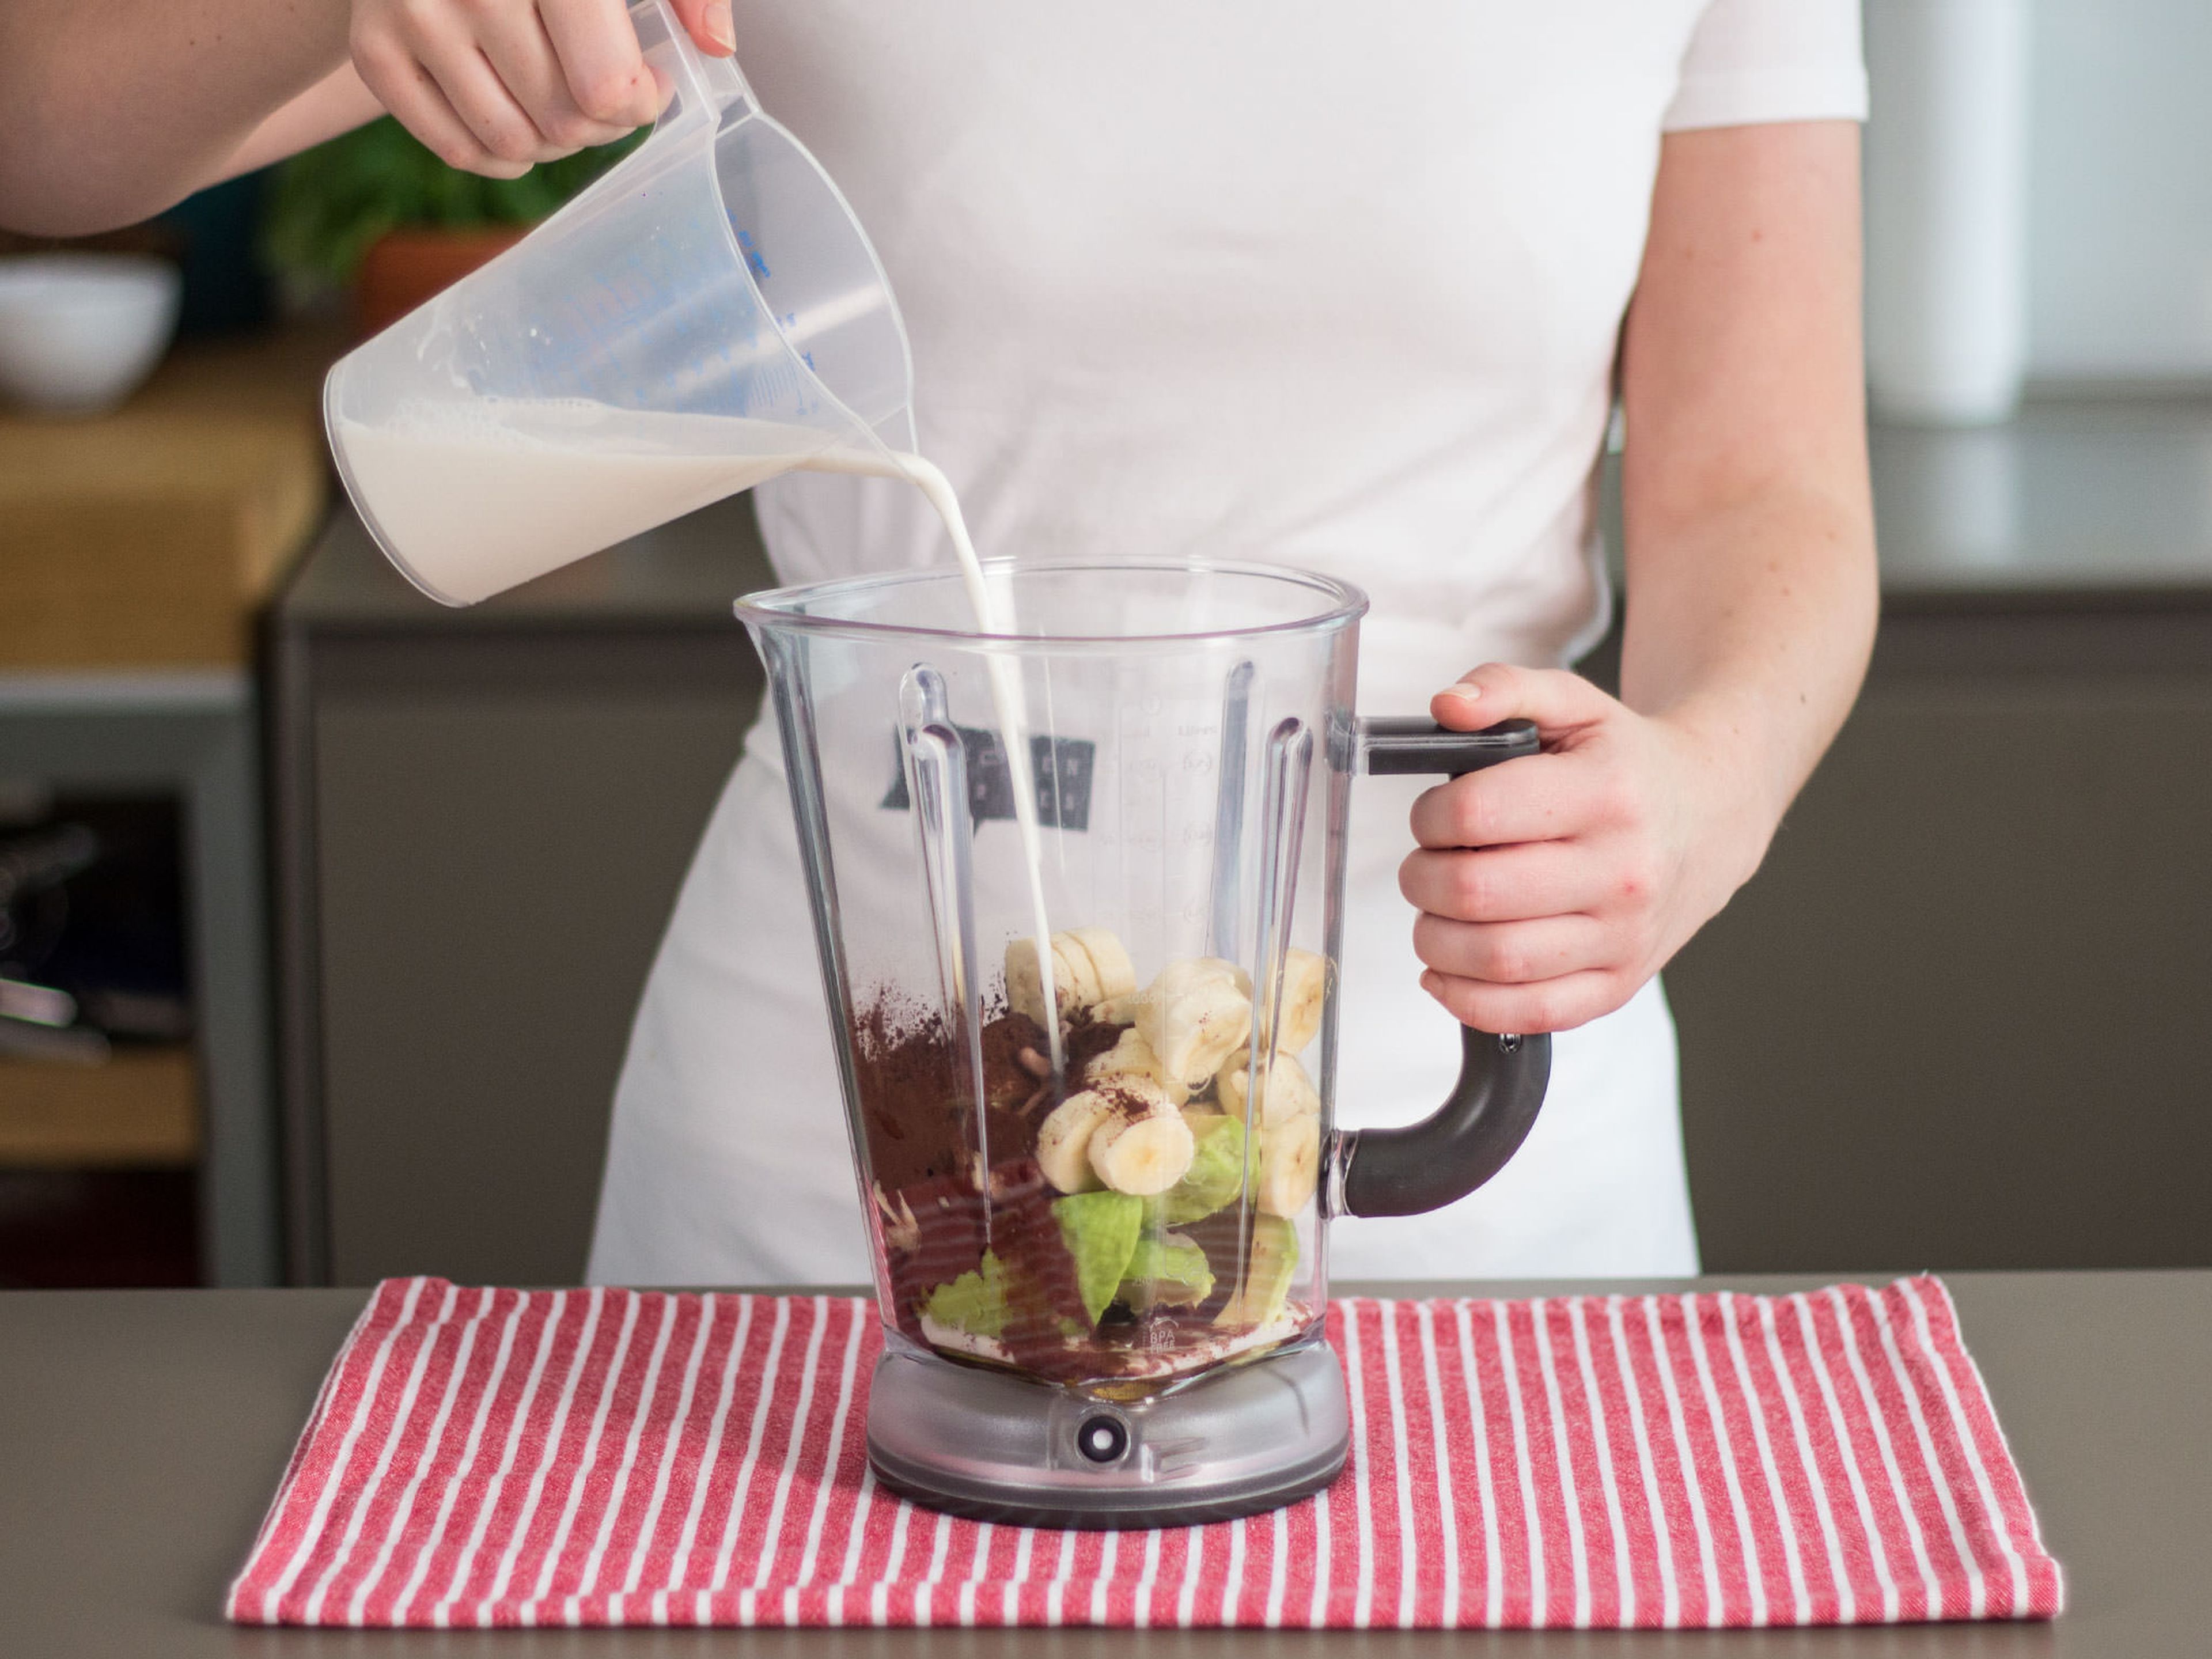 Add almond milk to blender and blend on high speed for approx. 1 –2 min. until a smooth, pudding-like consistency is achieved.